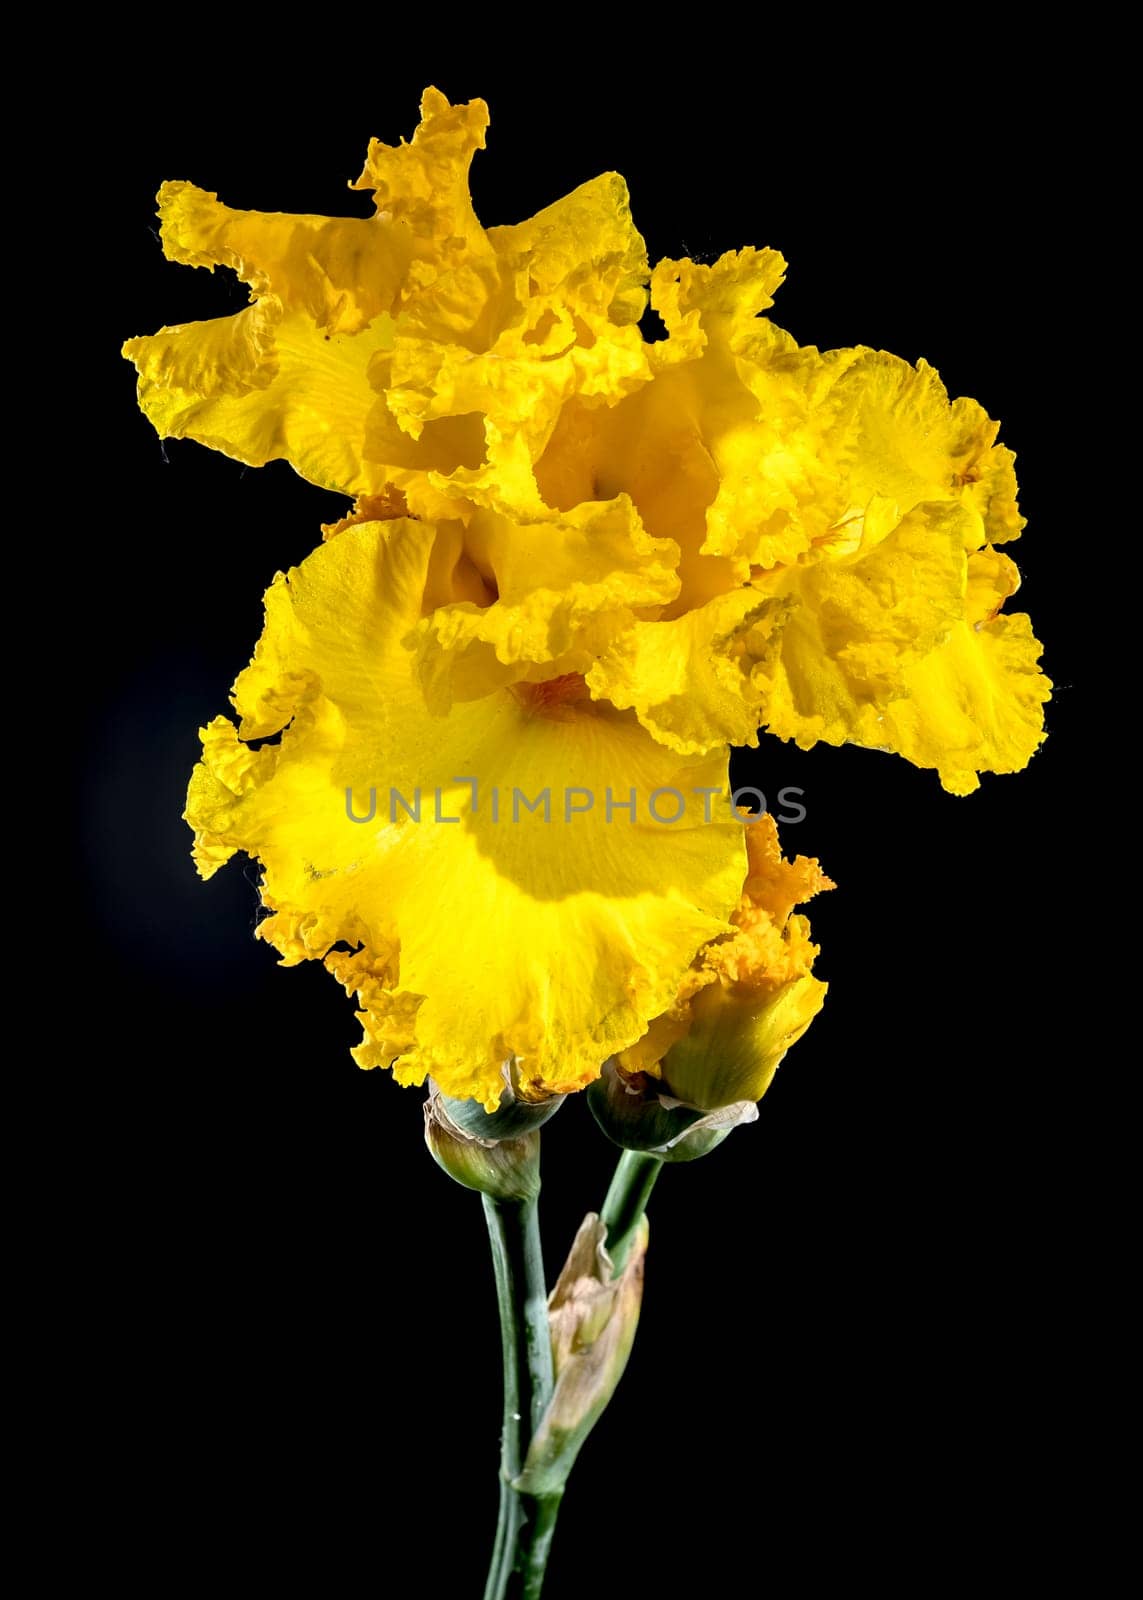 Beautiful Blooming yellow iris on a black background. Flower head close-up.